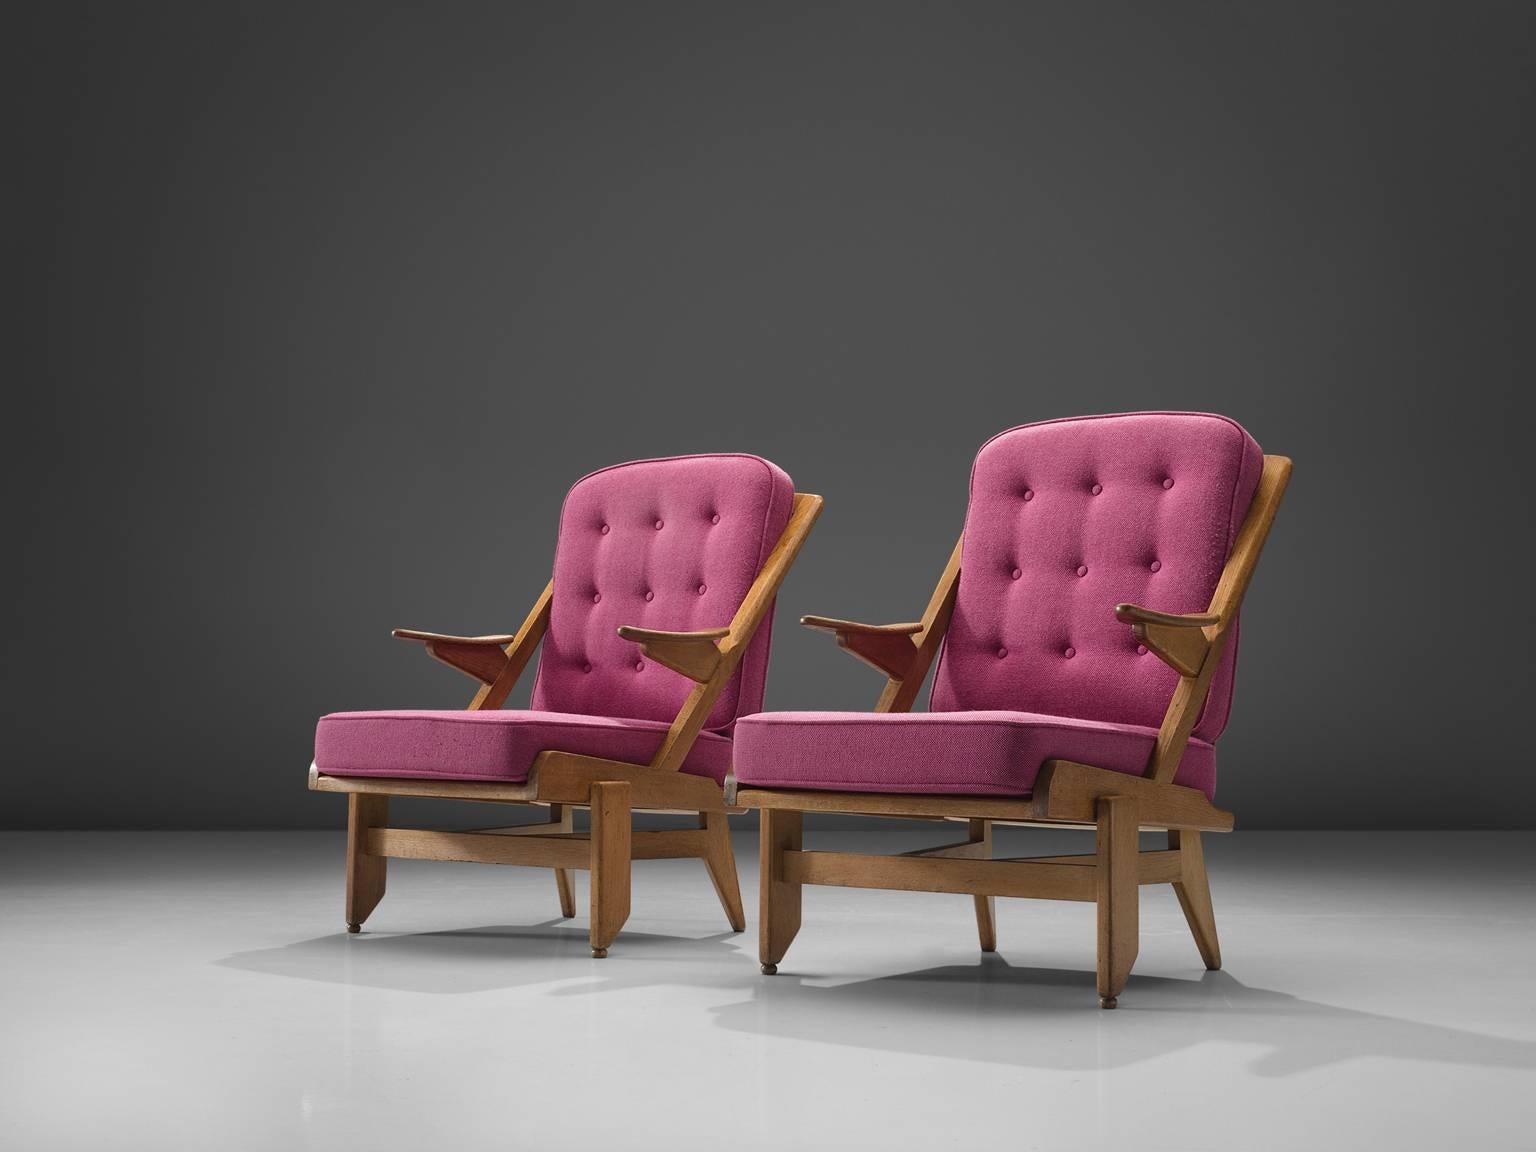 Guillerme and Chambron, pair of lounge chairs, pink fabric and oak, France, 1950s. 

This French designer duo is known for their extreme high quality solid oak furniture, from which this pink set is another great example. These chairs have a very